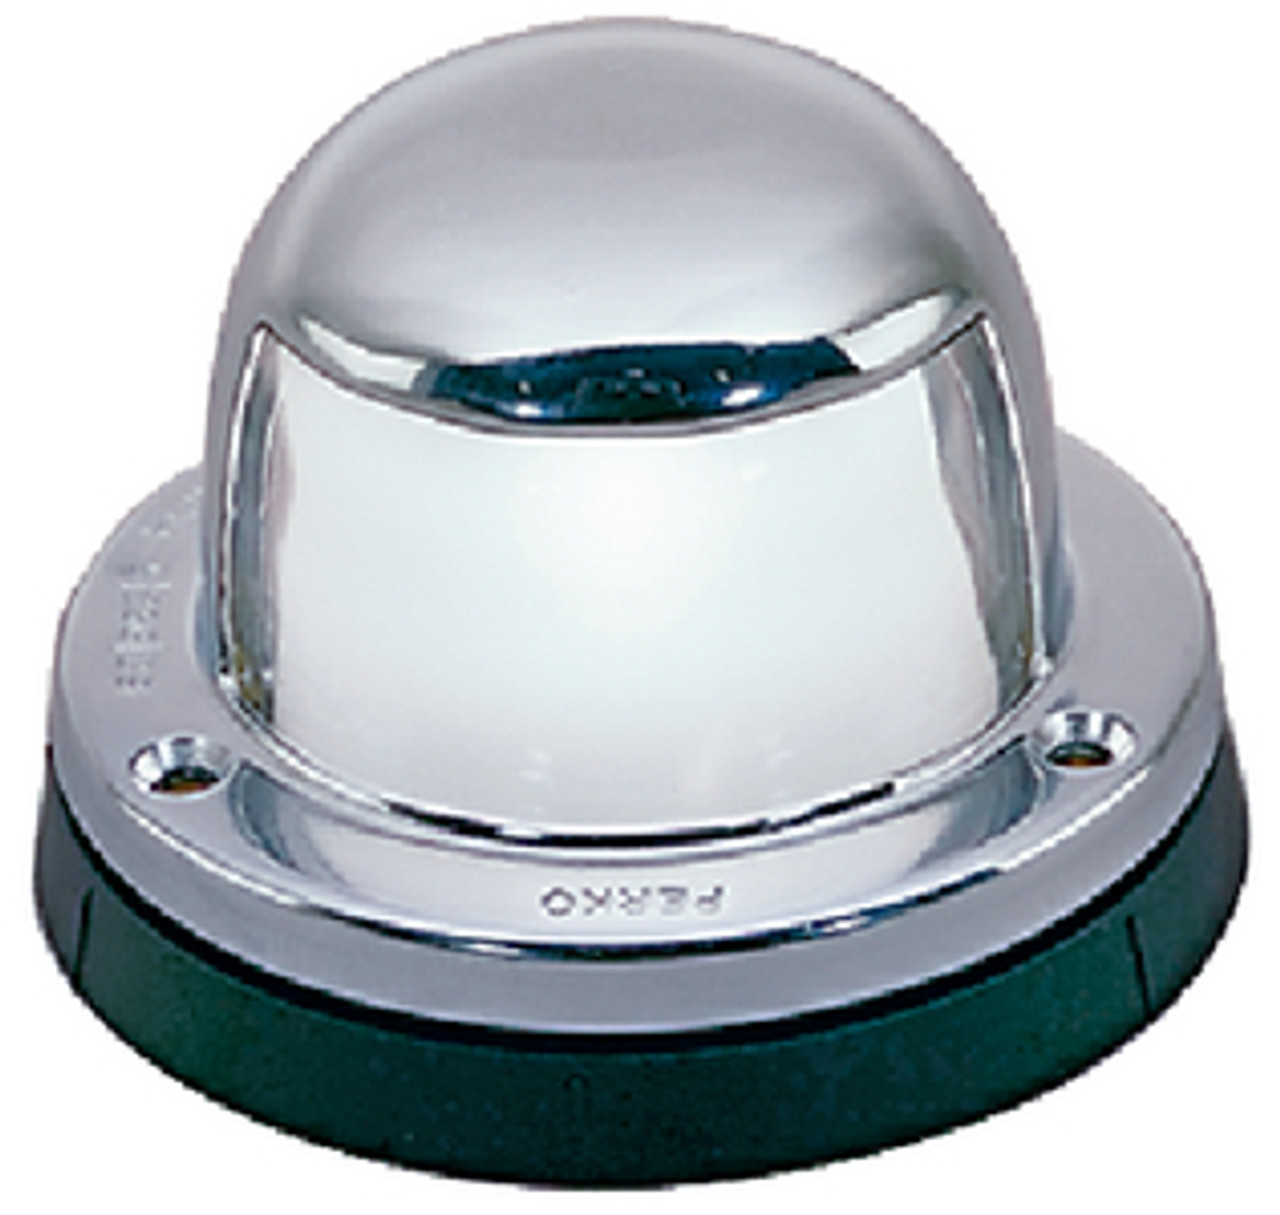 Chrome Plated Brass Stern Navigation Light for Boats - 2 Mile Visibility